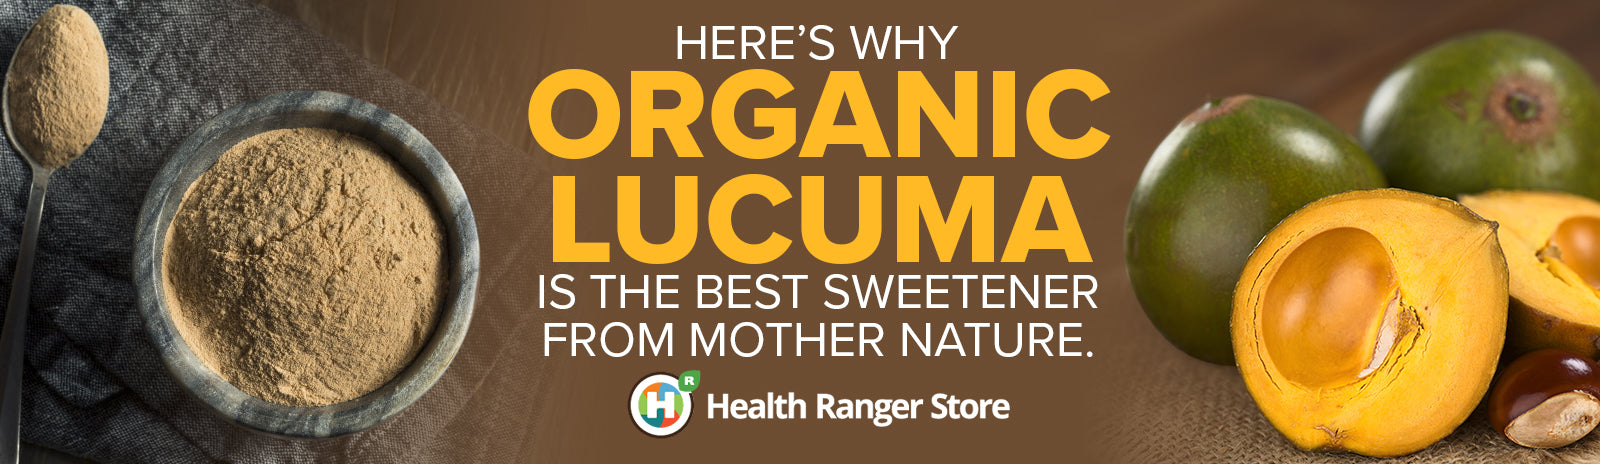 Here’s why organic lucuma is the best sweetener from Mother Nature